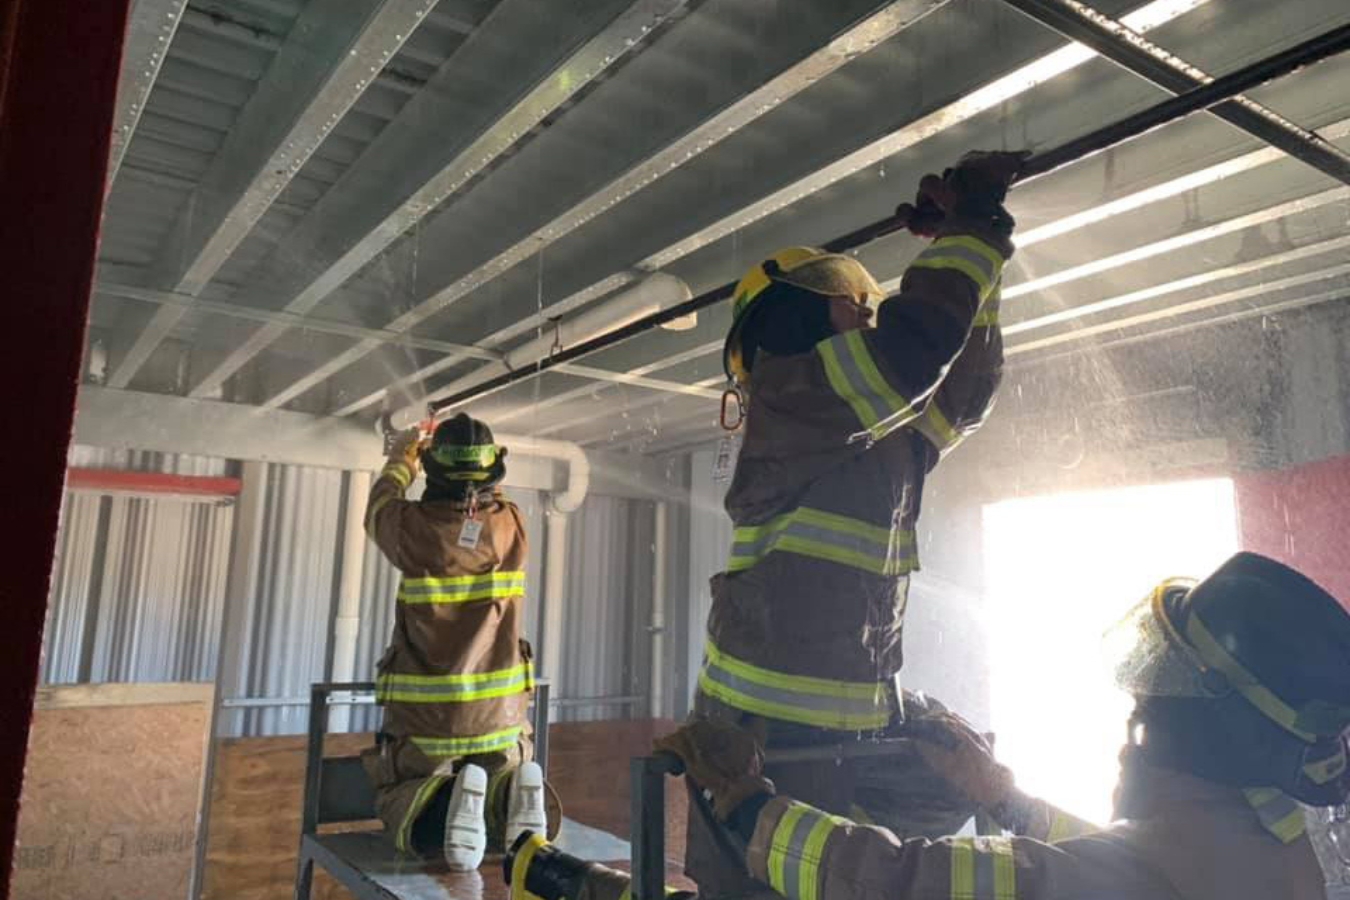 firefighter students participating in a training activity at the fire academy building working with a sprinkler system